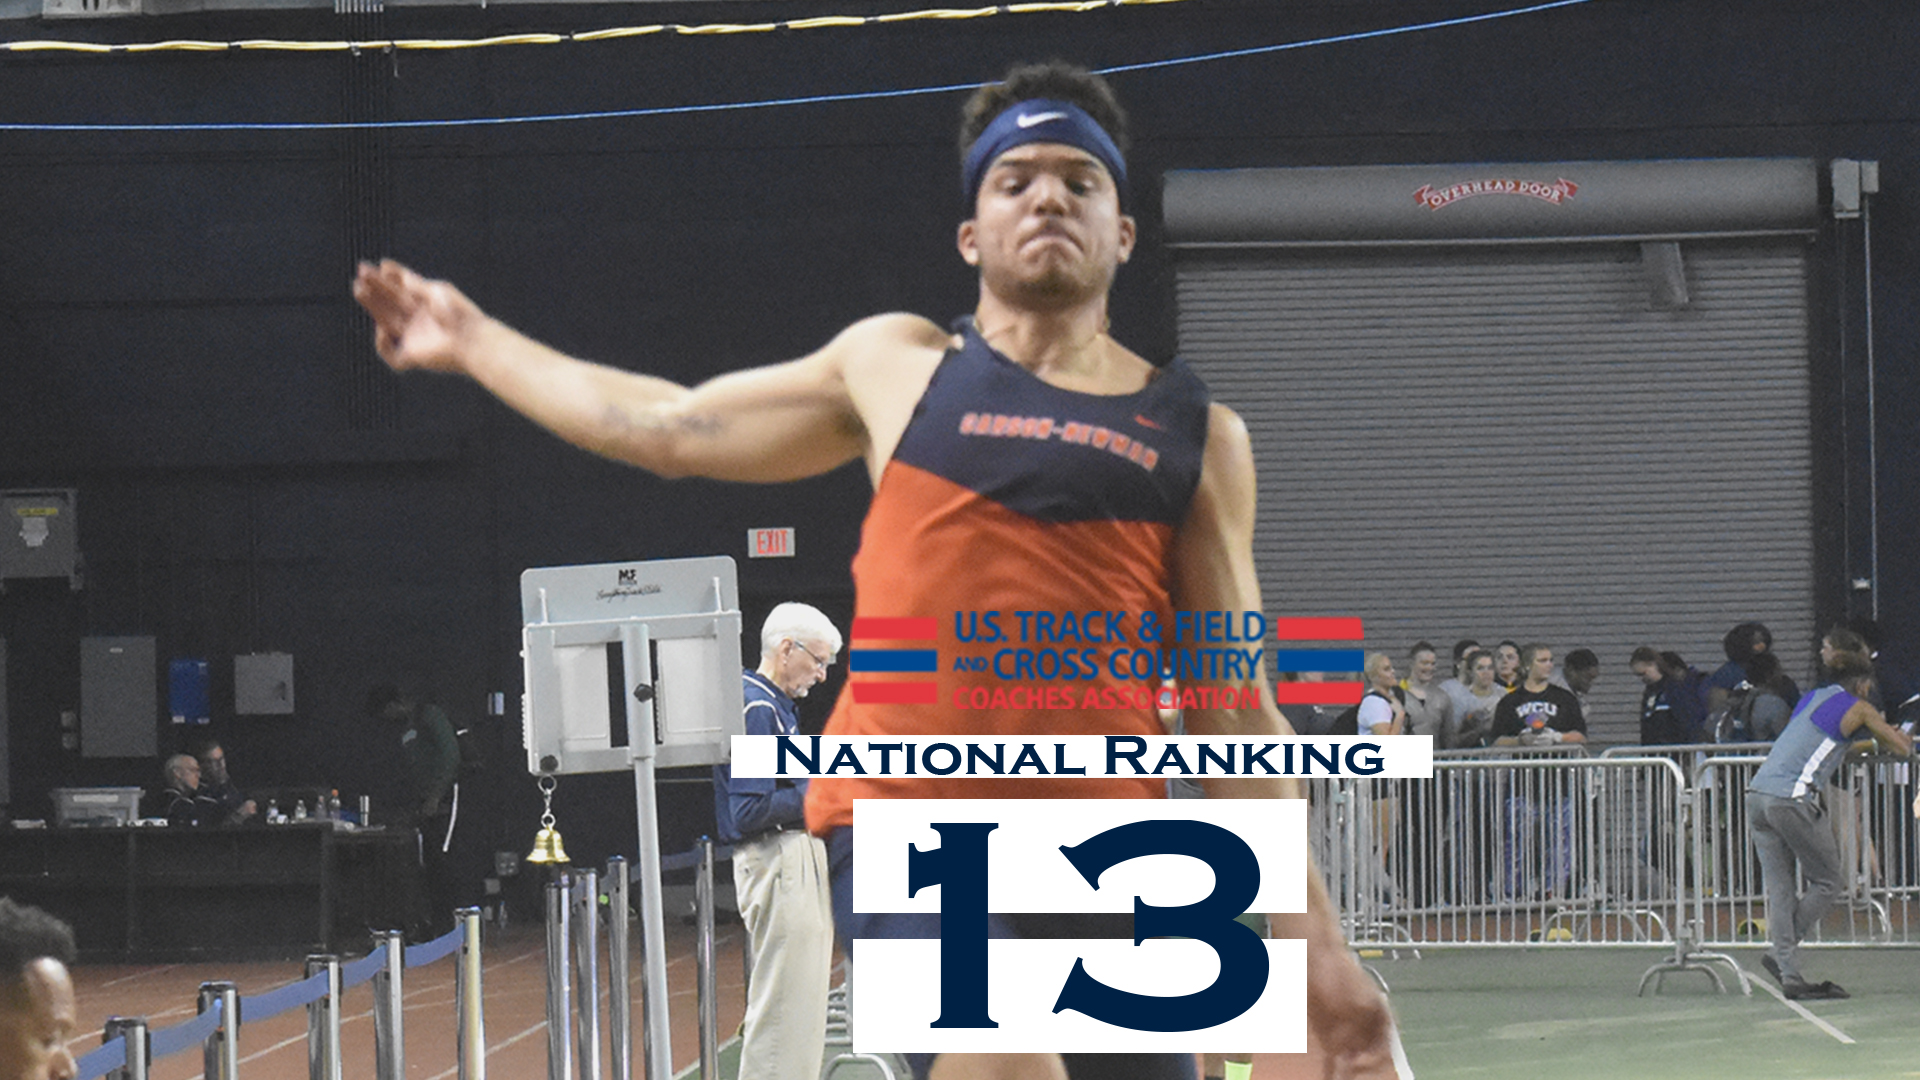 Eagles land at lucky No. 13 for first week of USTFCCCA National Poll